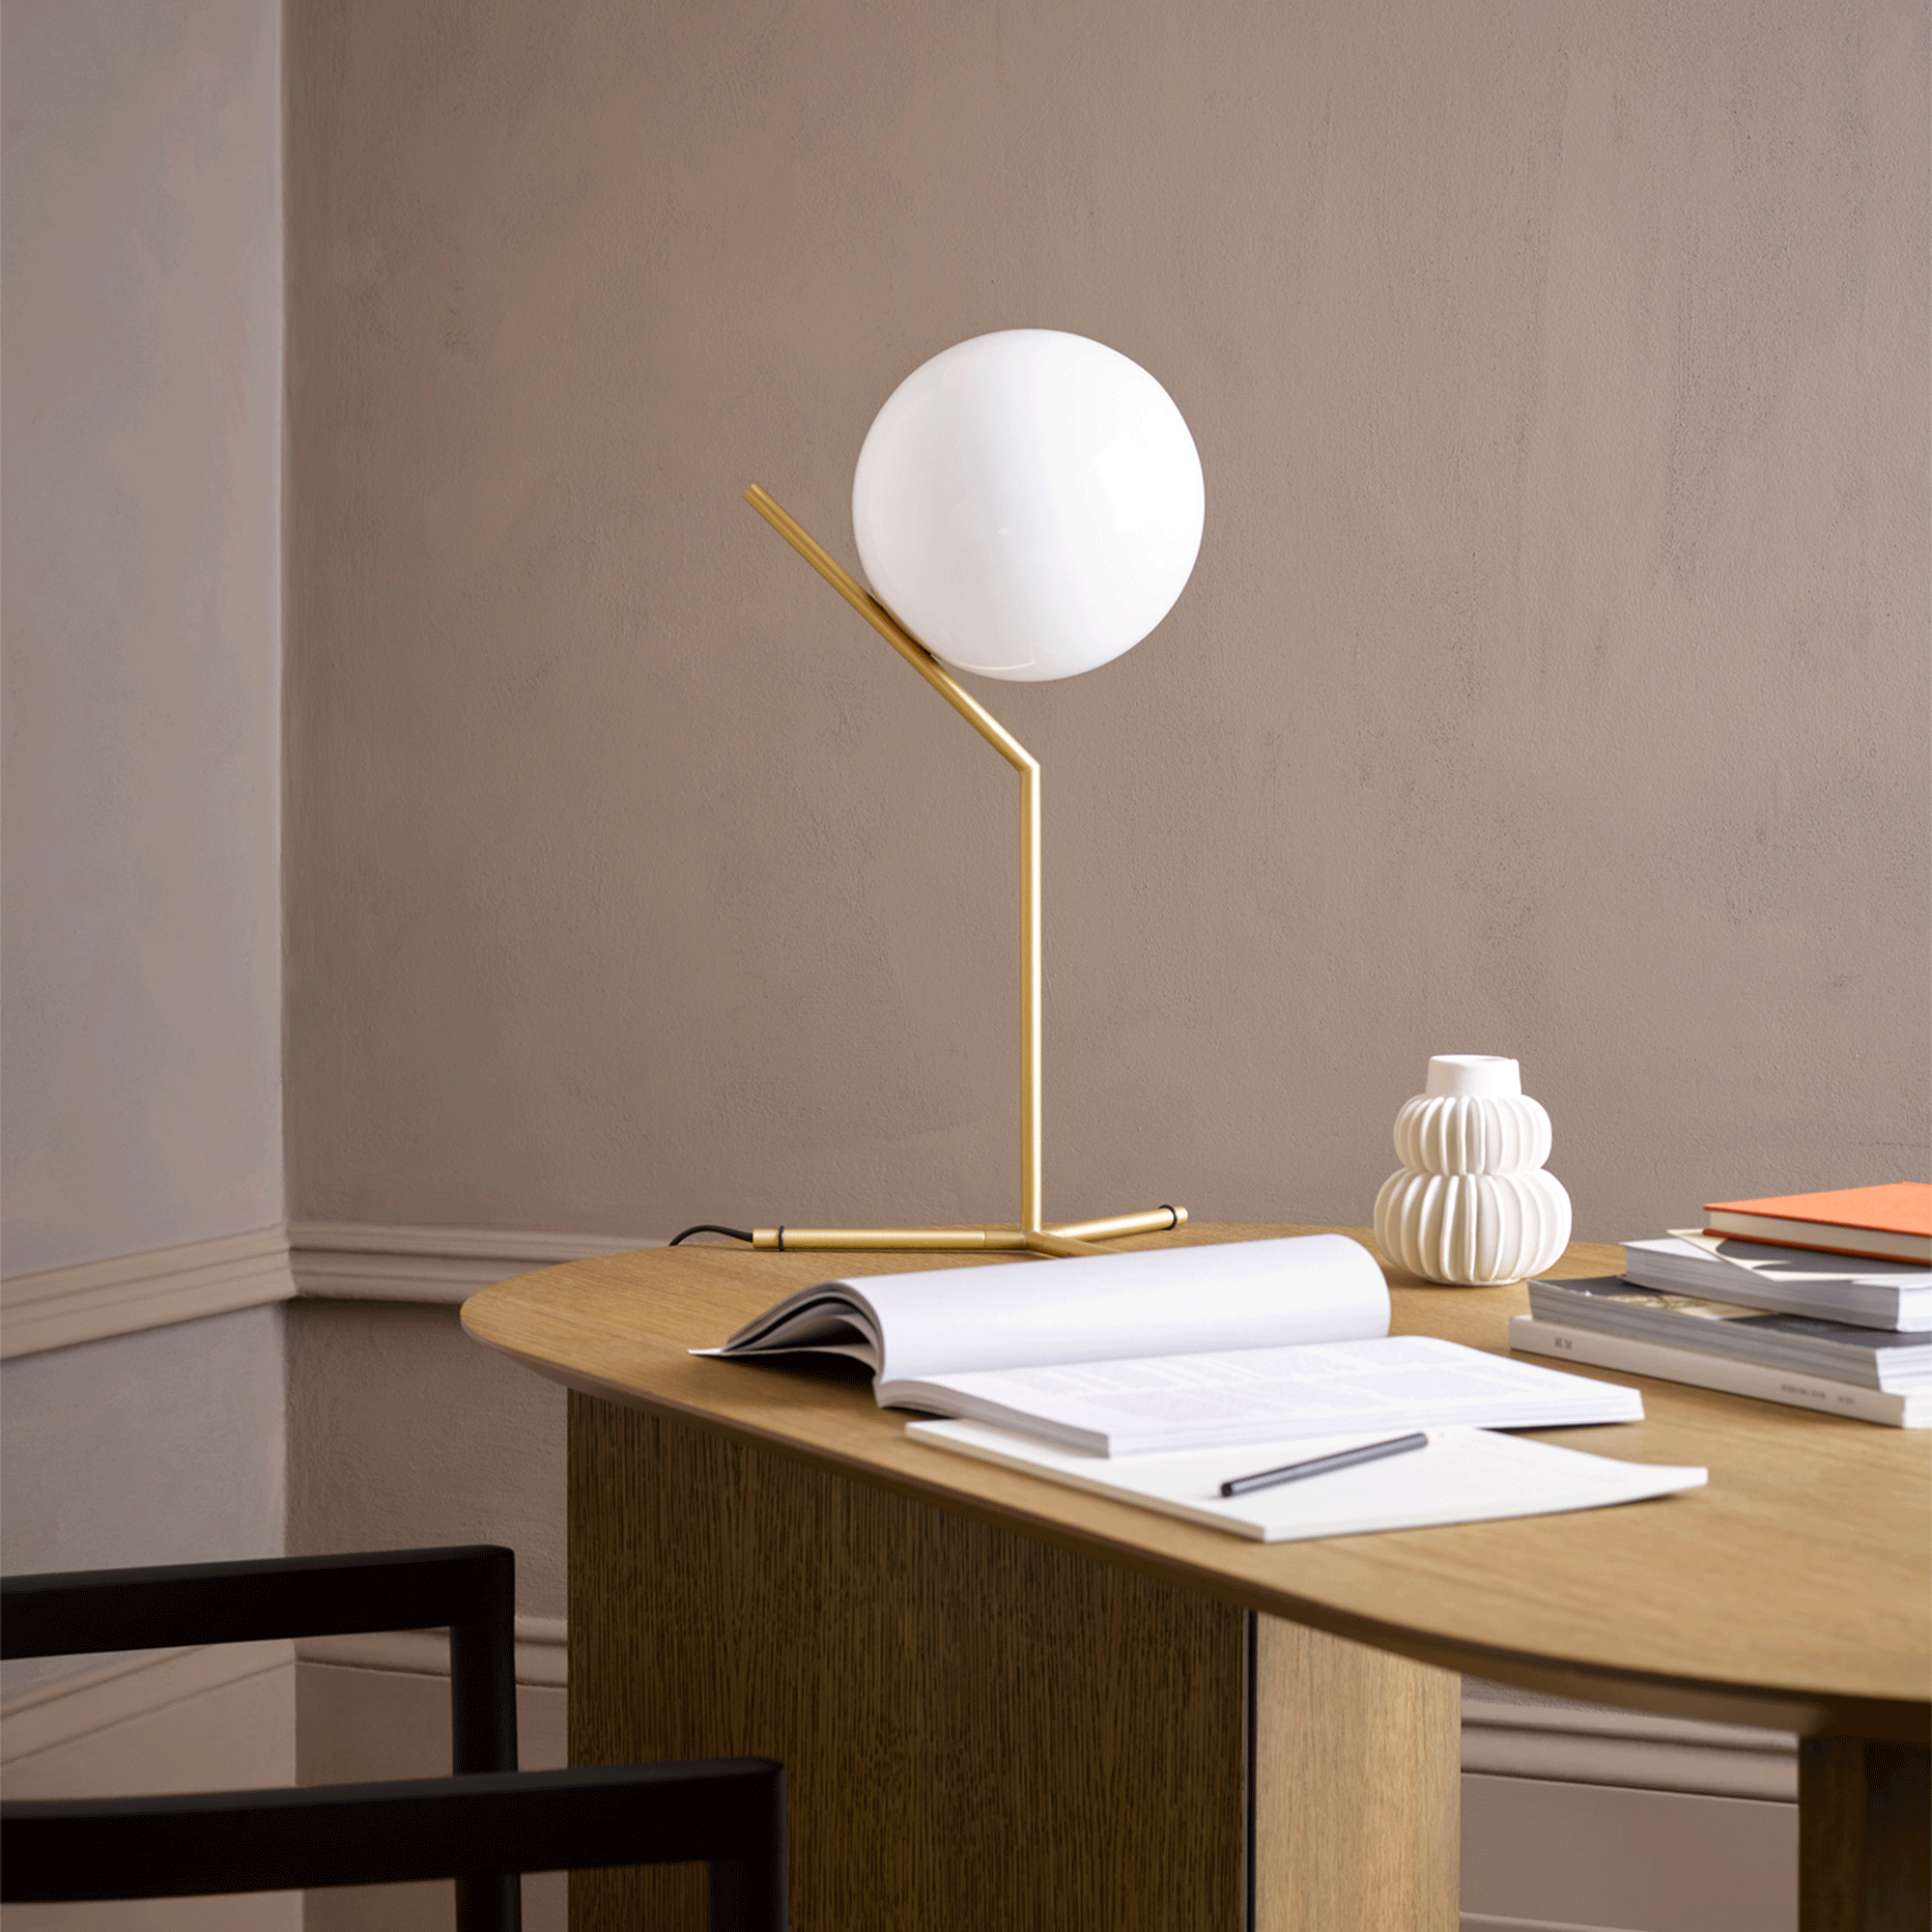 Lamp on desk with suede paint